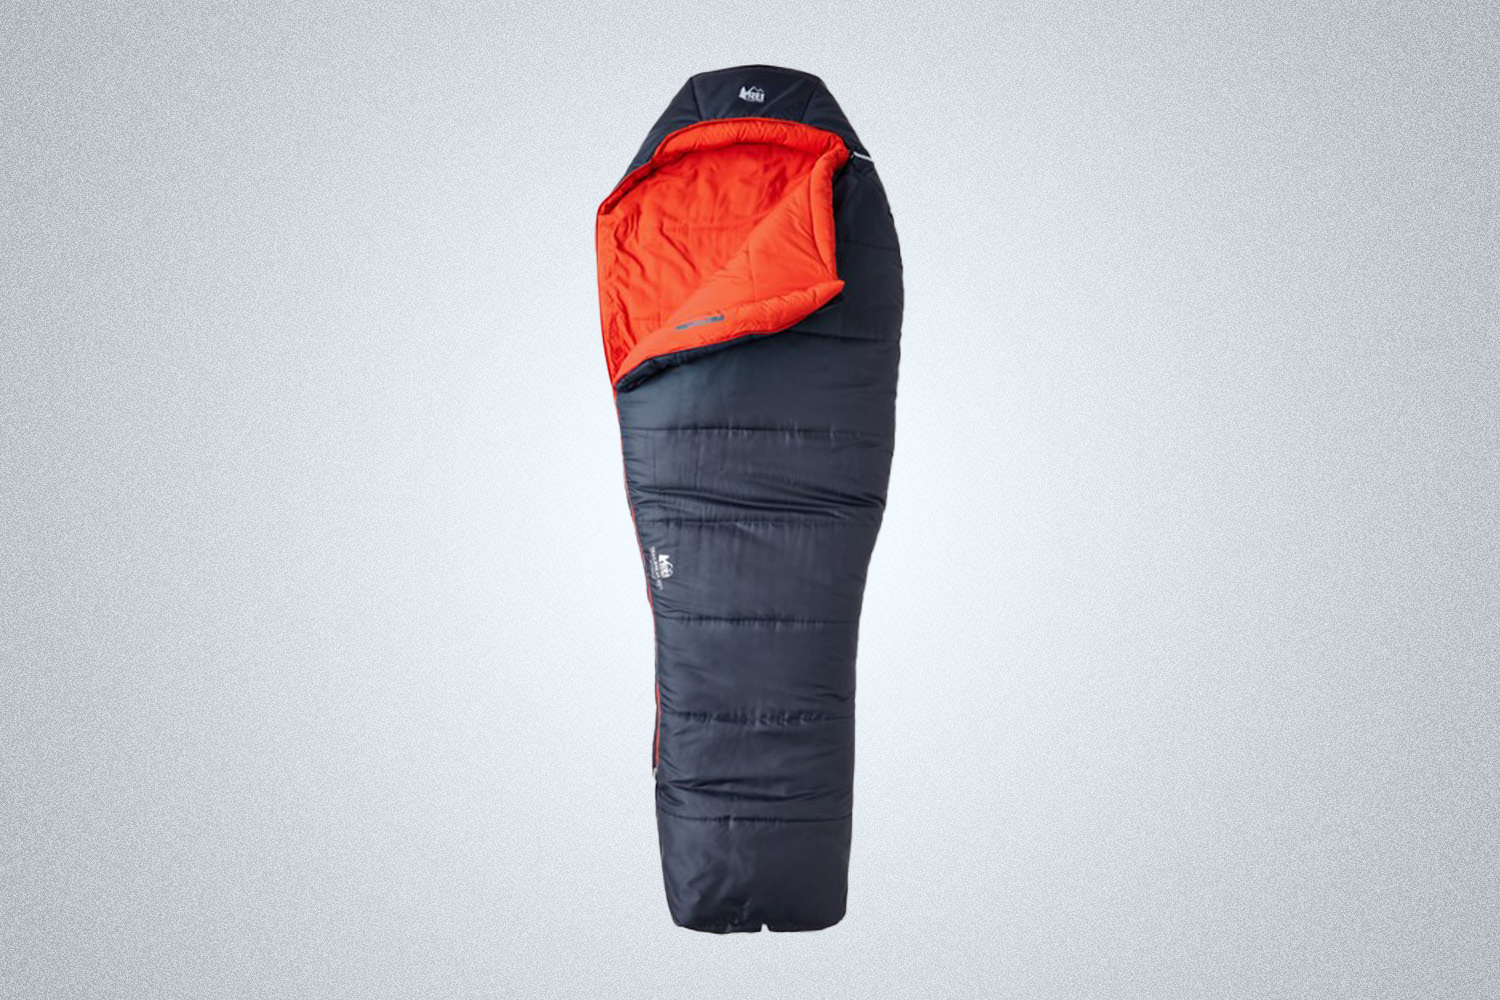 Keep the REI Co-op Trailbreak 20 Sleeping Bag in your car for winter emergencies and troubles in 2022